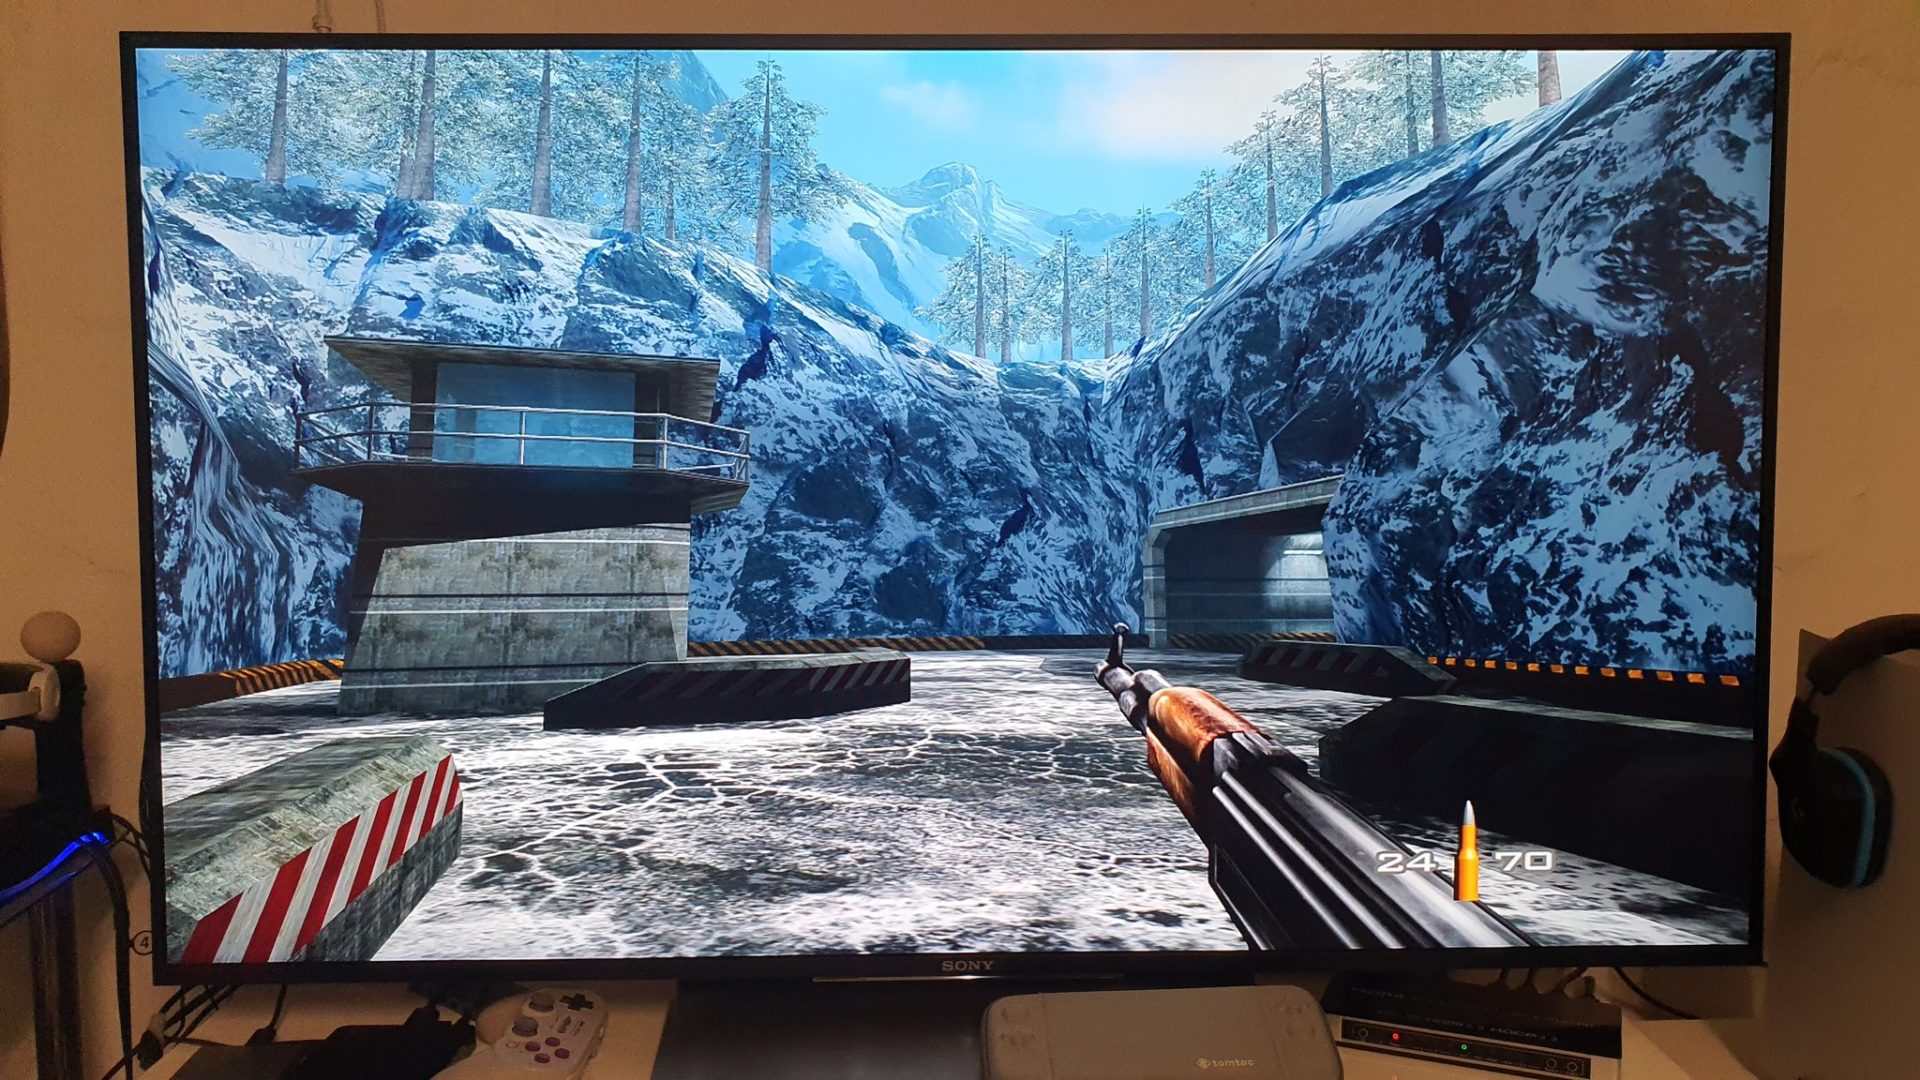 GoldenEye’s Xbox remaster has leaked online and it’s fully playable